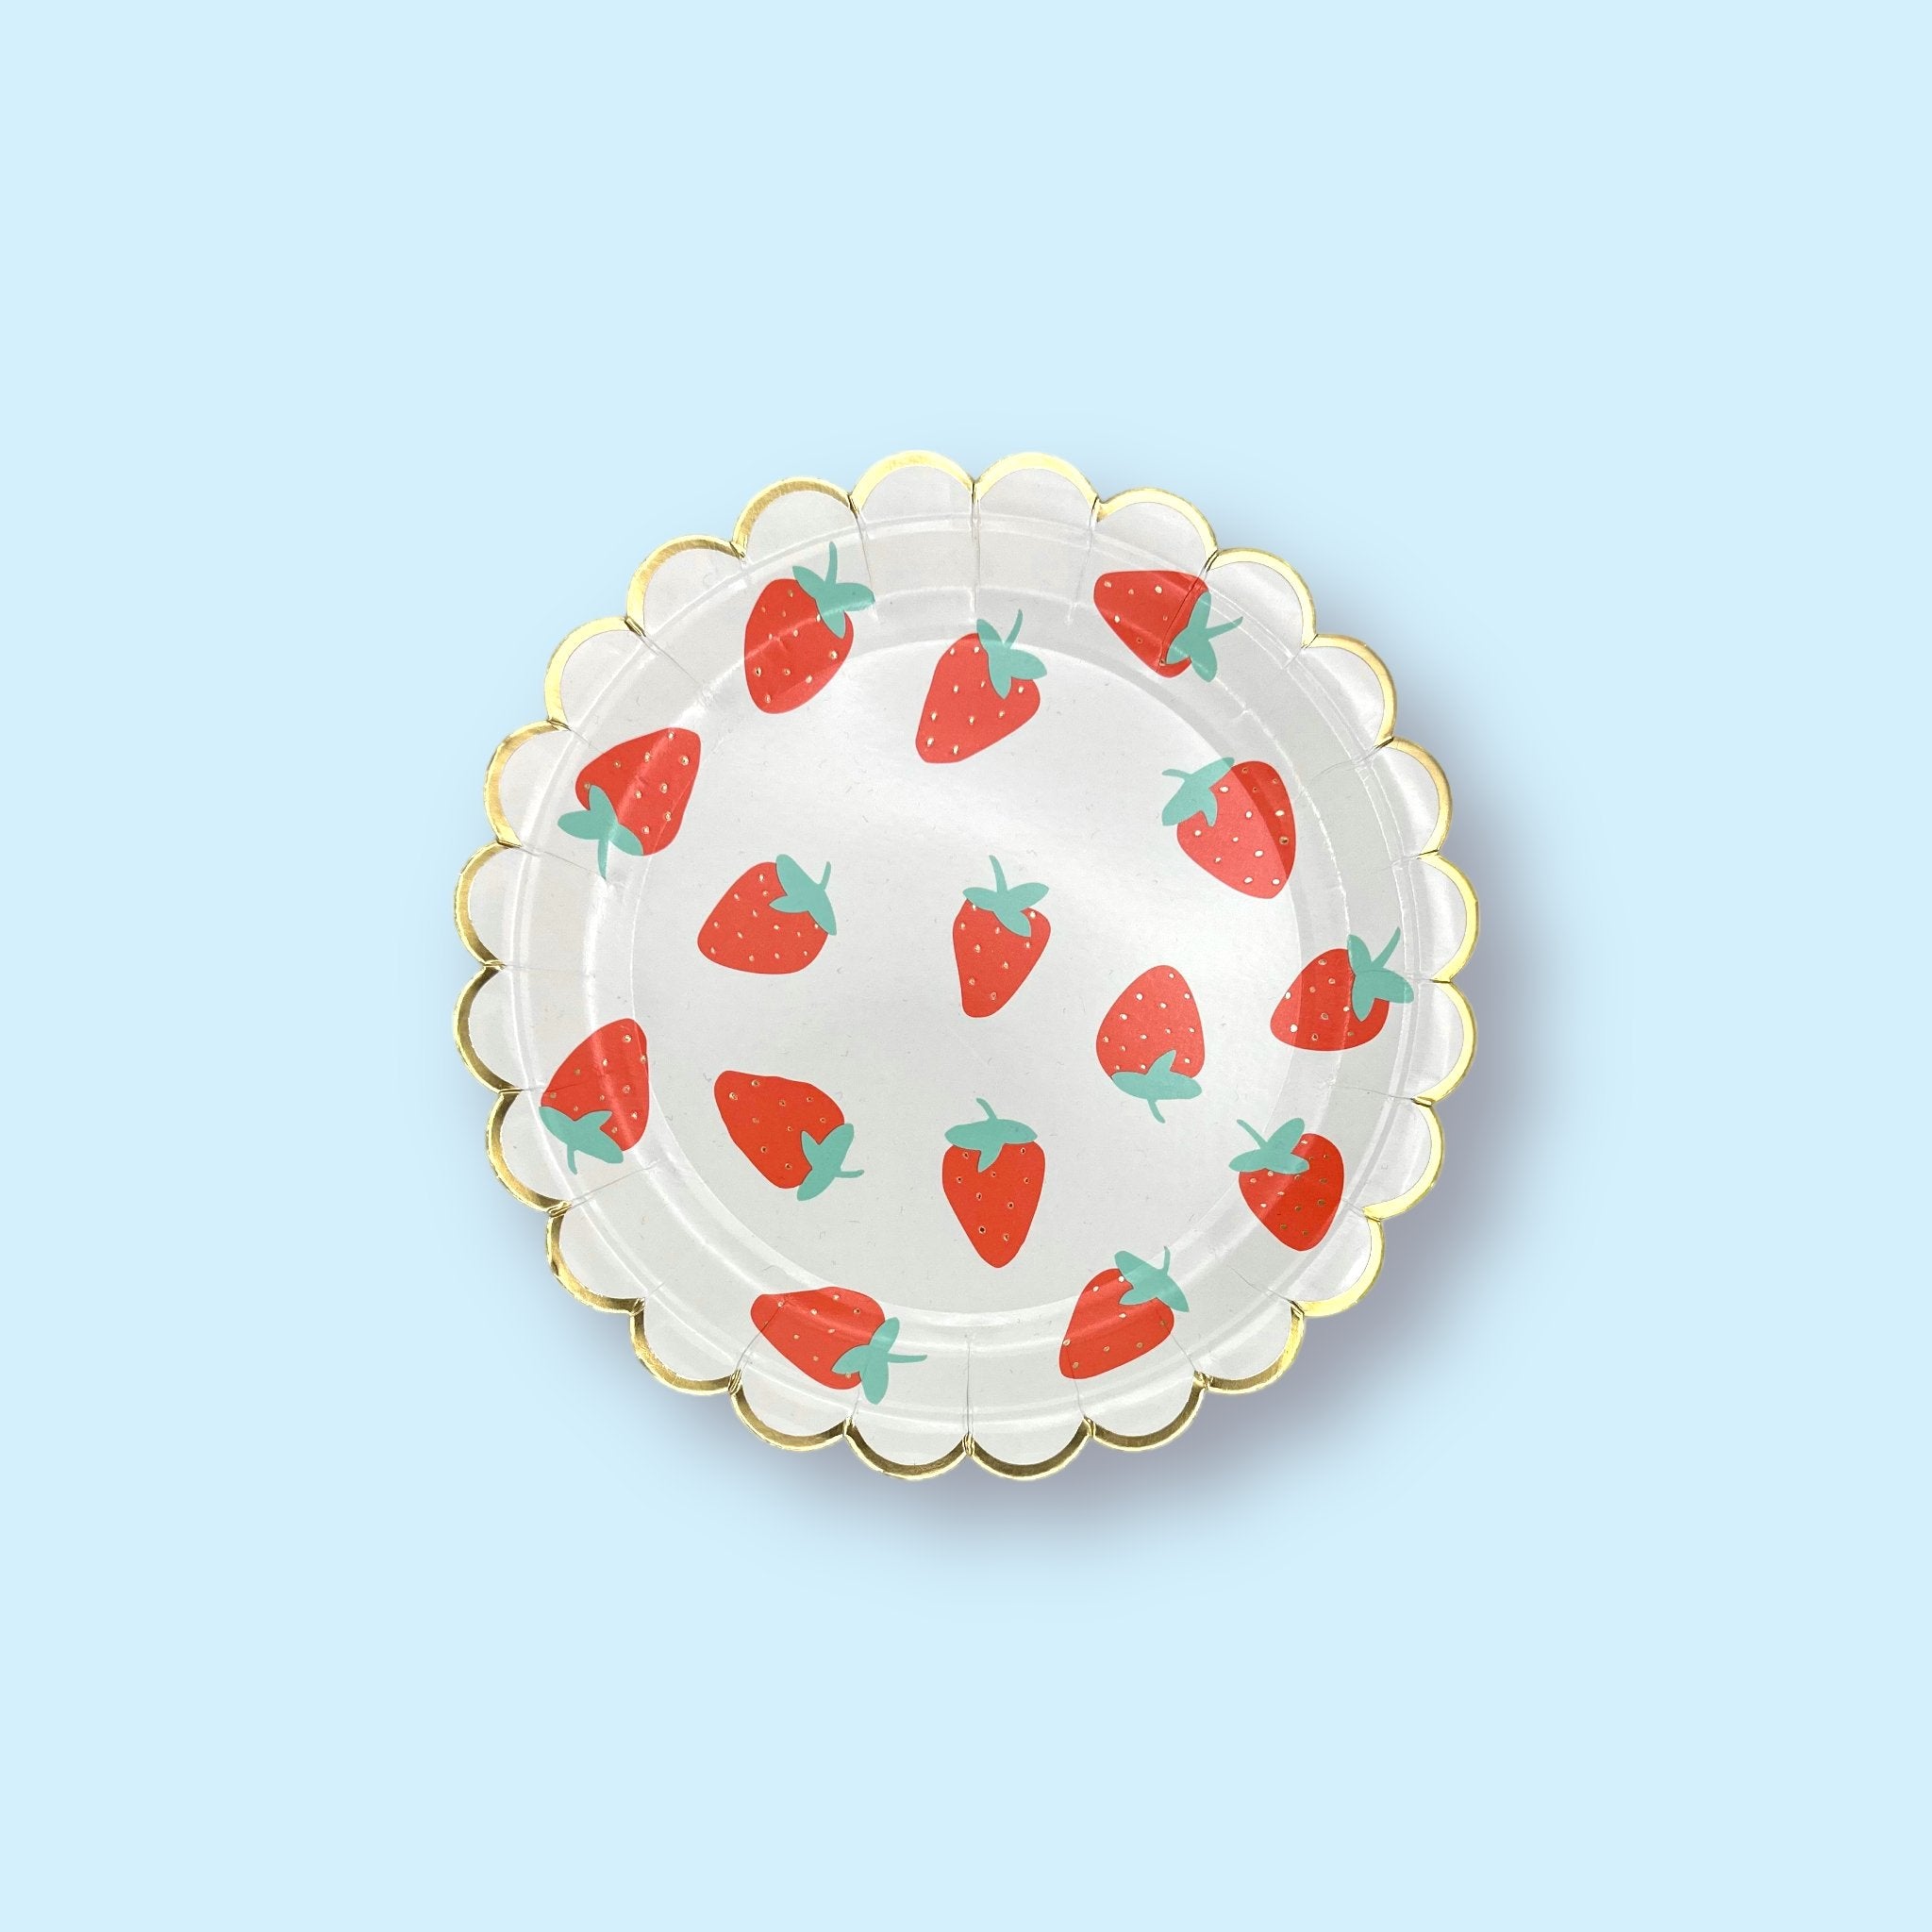 8 English Strawberry Paper Party Cake Plates (7 inch) - Cook and Party